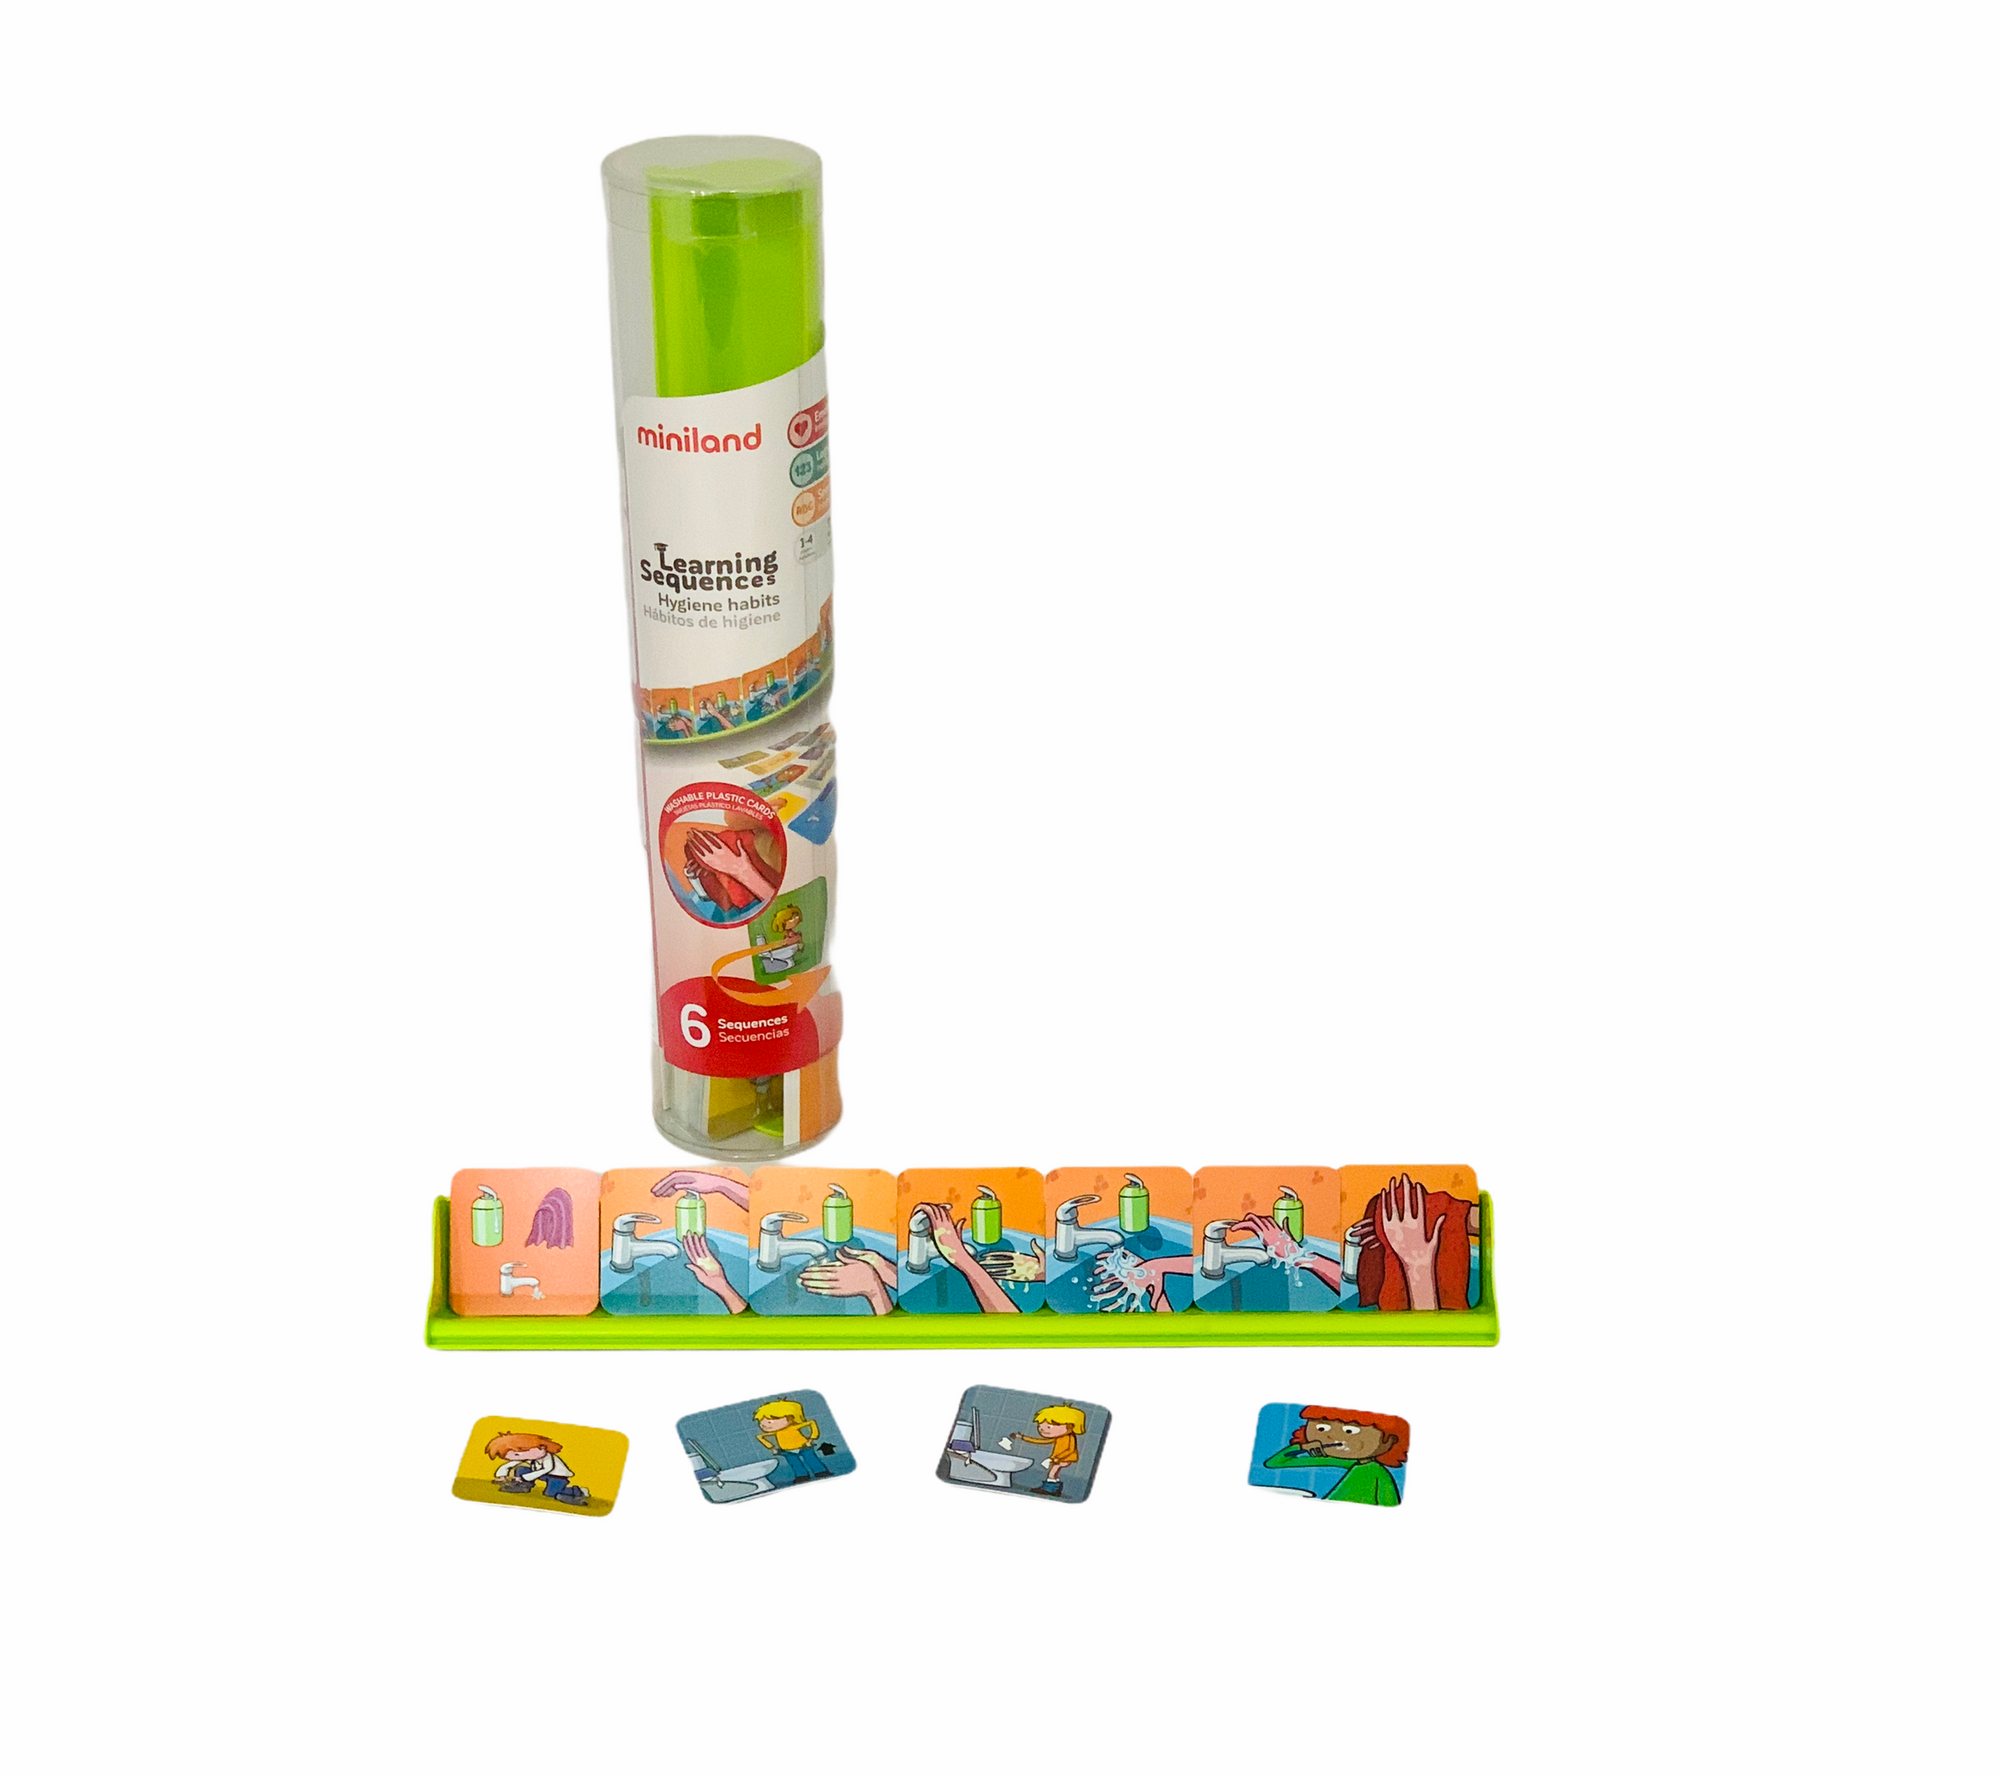 Miniland Learning Sequences - Hygiene Habits cards in front of case